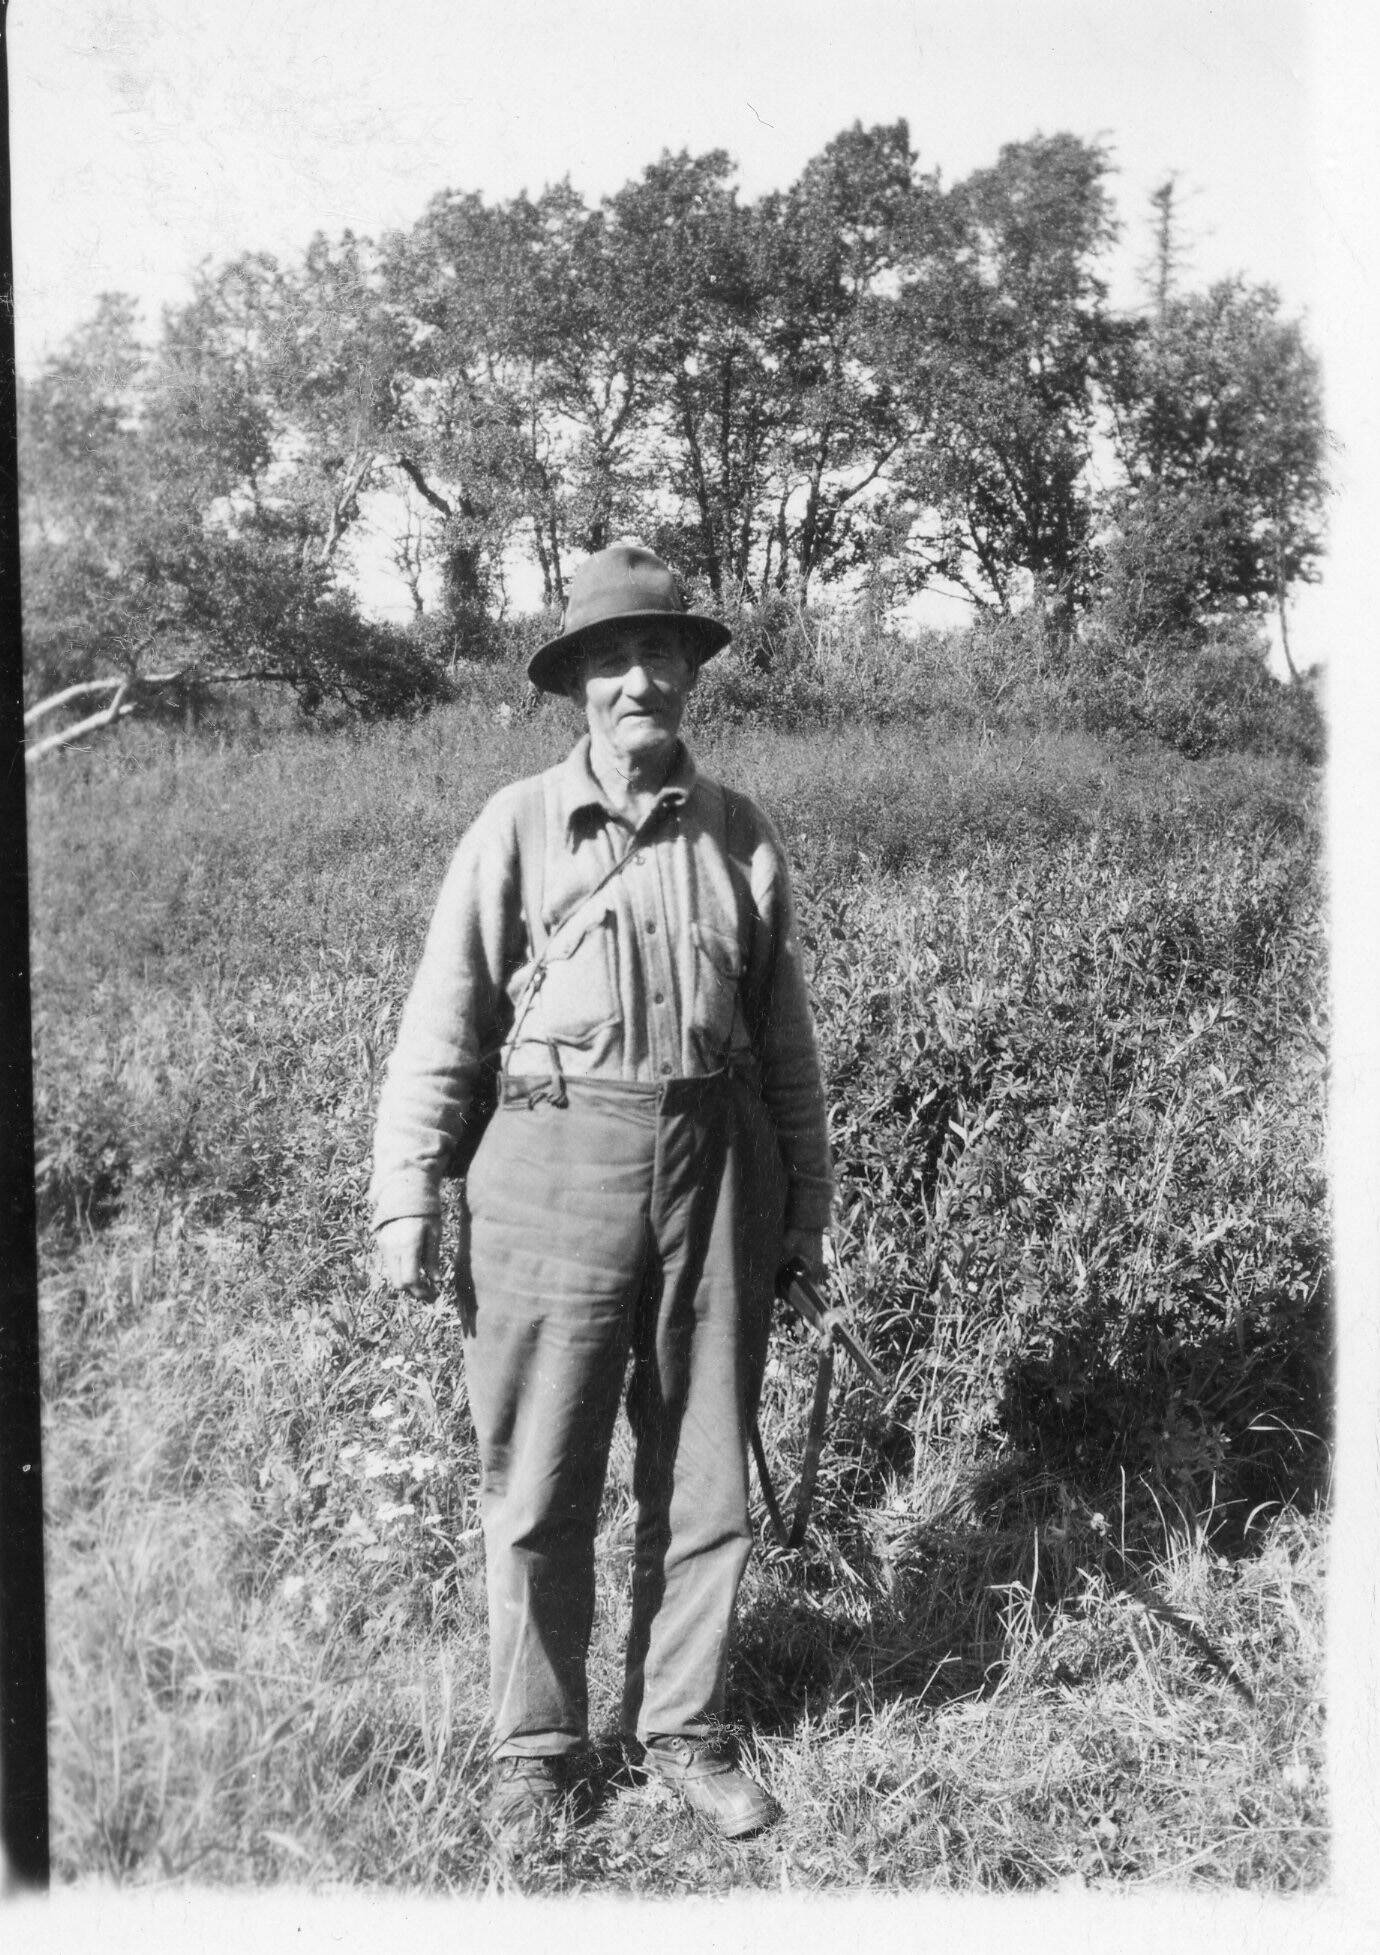 Photo courtesy of Katie Matthews
One of Rex Hanks’s early “neighbors” was Frank M. Larson, seen here with his rifle in the late 1940s, shortly after he moved to the Happy Valley area.